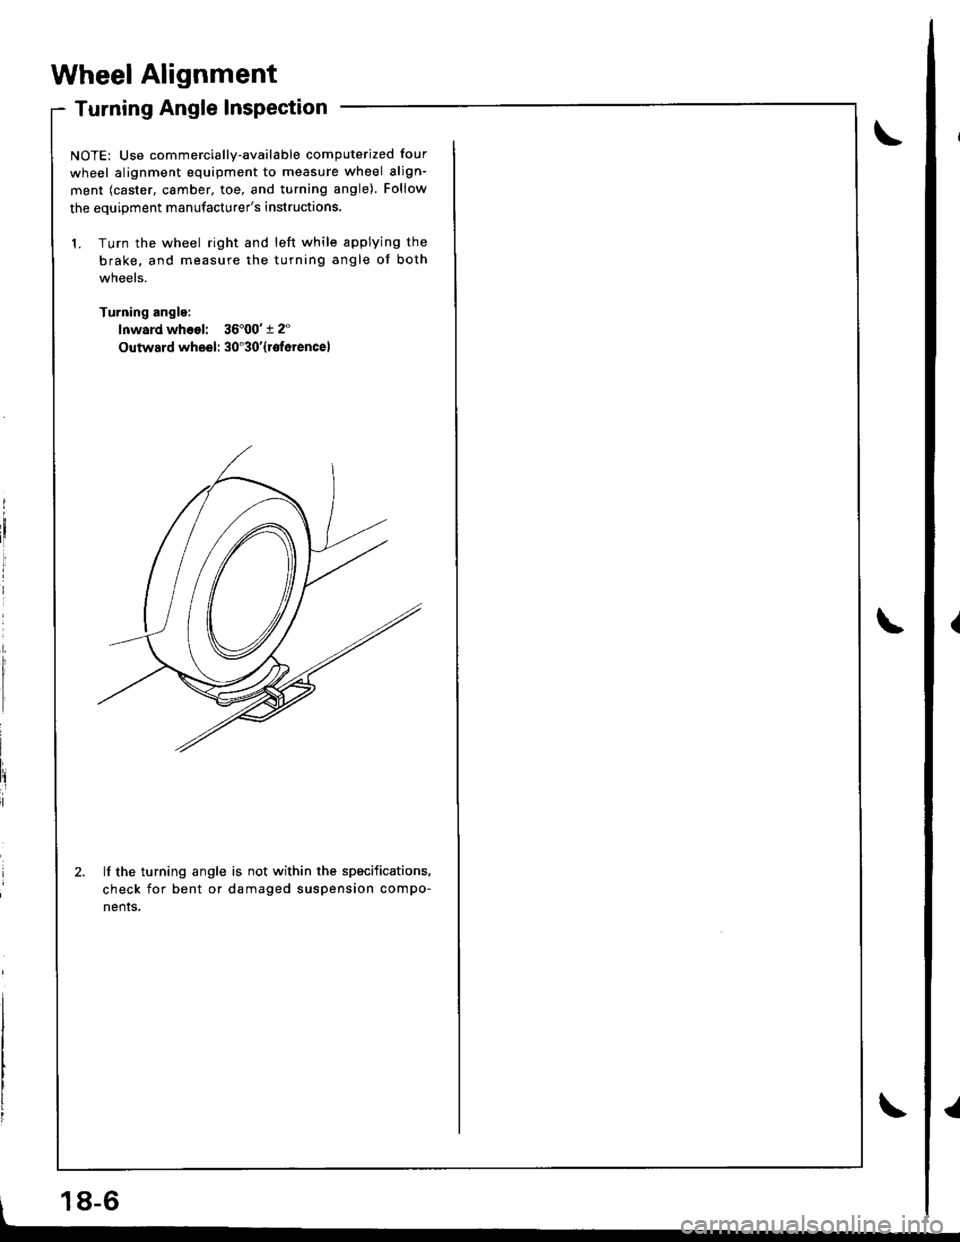 HONDA INTEGRA 1998 4.G Workshop Manual l,
Wheel Alignment
Turning Angle Inspection
NOTE: Use commercially-available computerized four
wheel alignment equipment to measure wheel align-
ment (caster, camber, toe, and turning angle). Follow
t